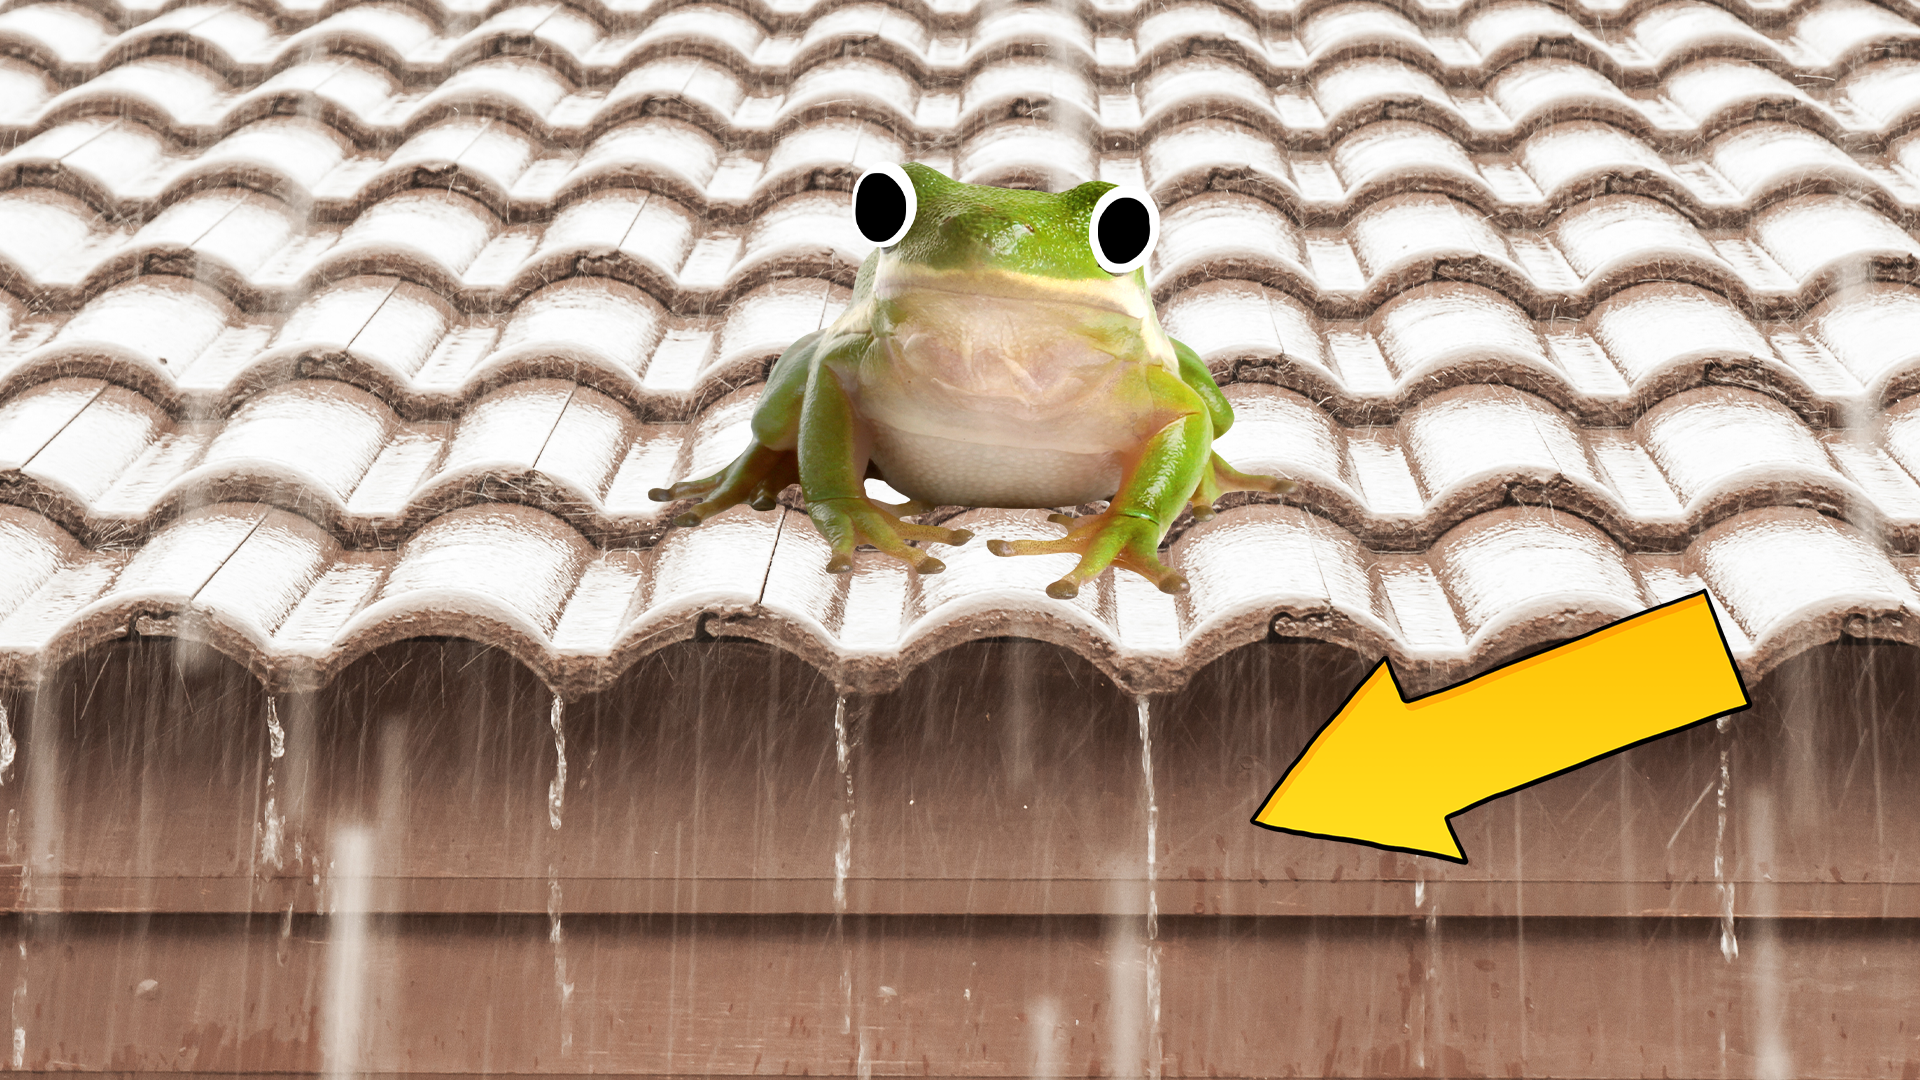 Rainy roof with frog and arrow